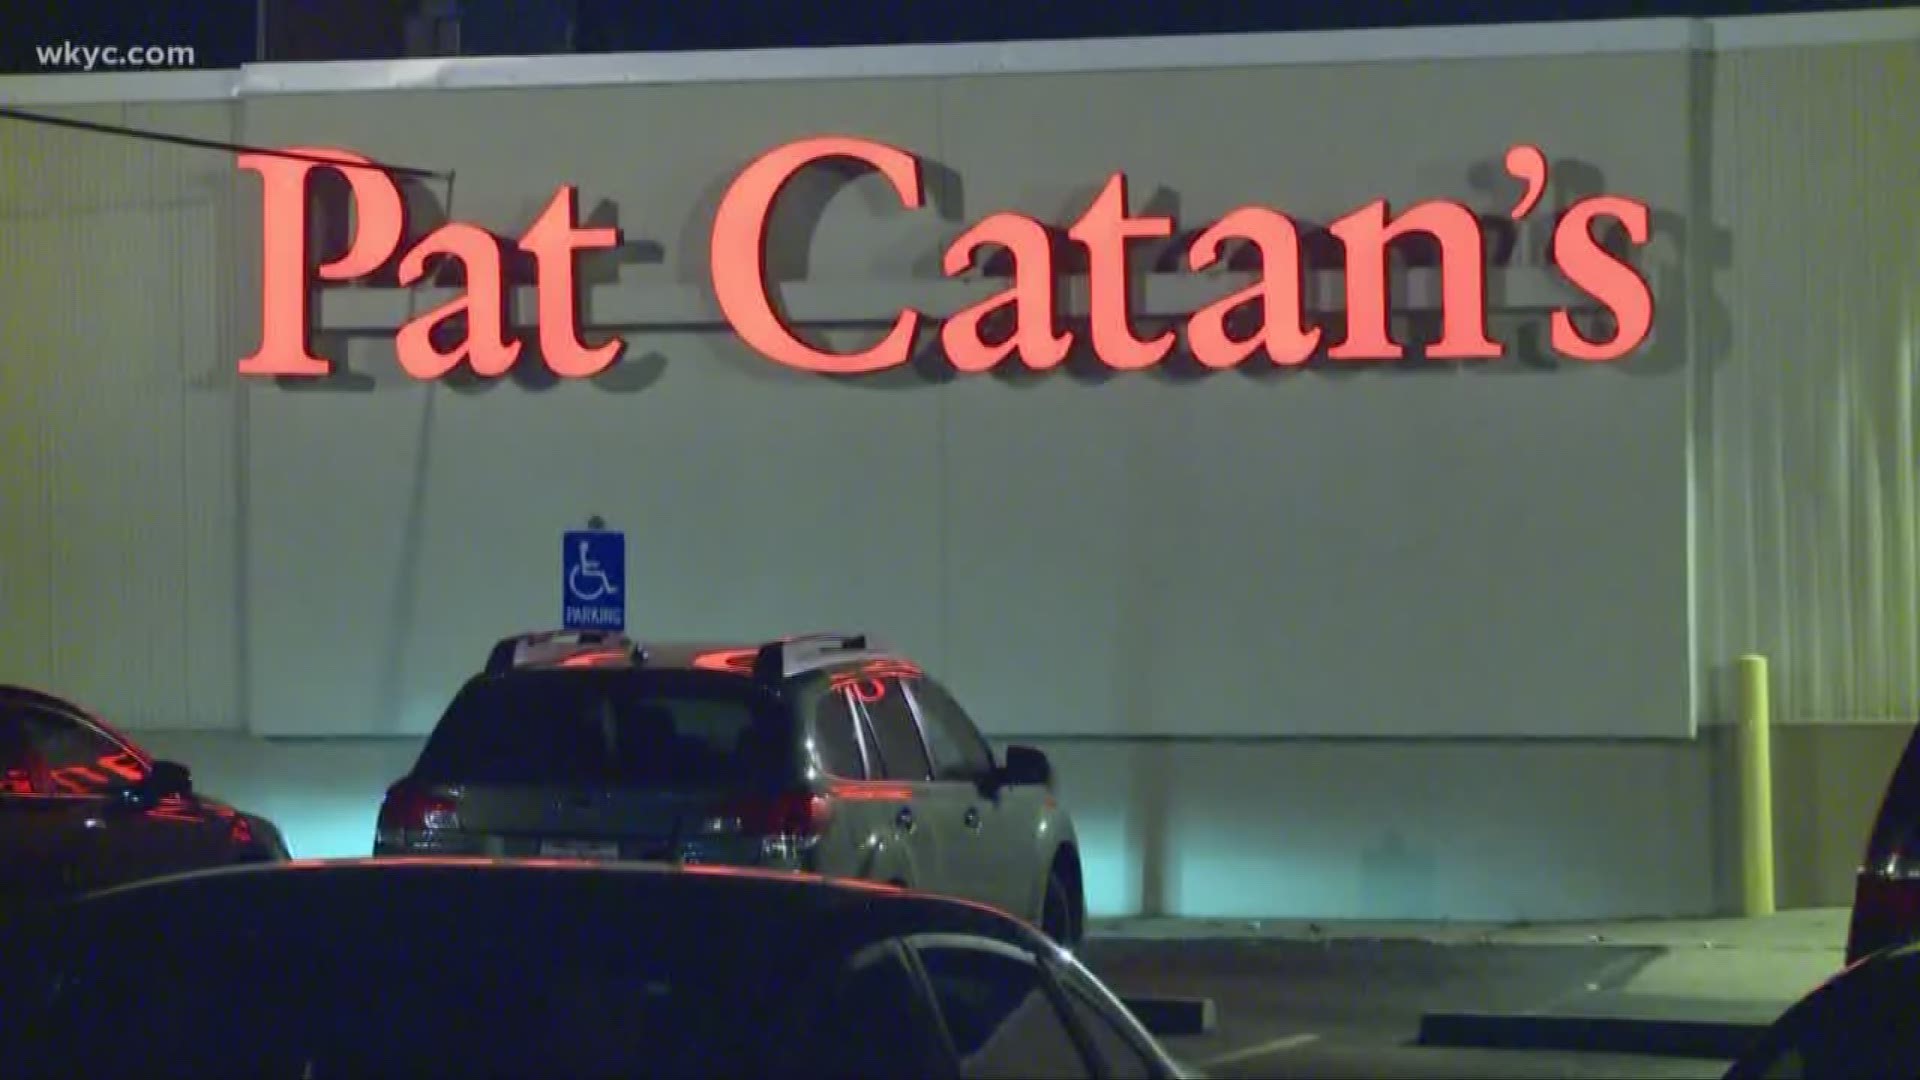 Pat Catan's to close all stores